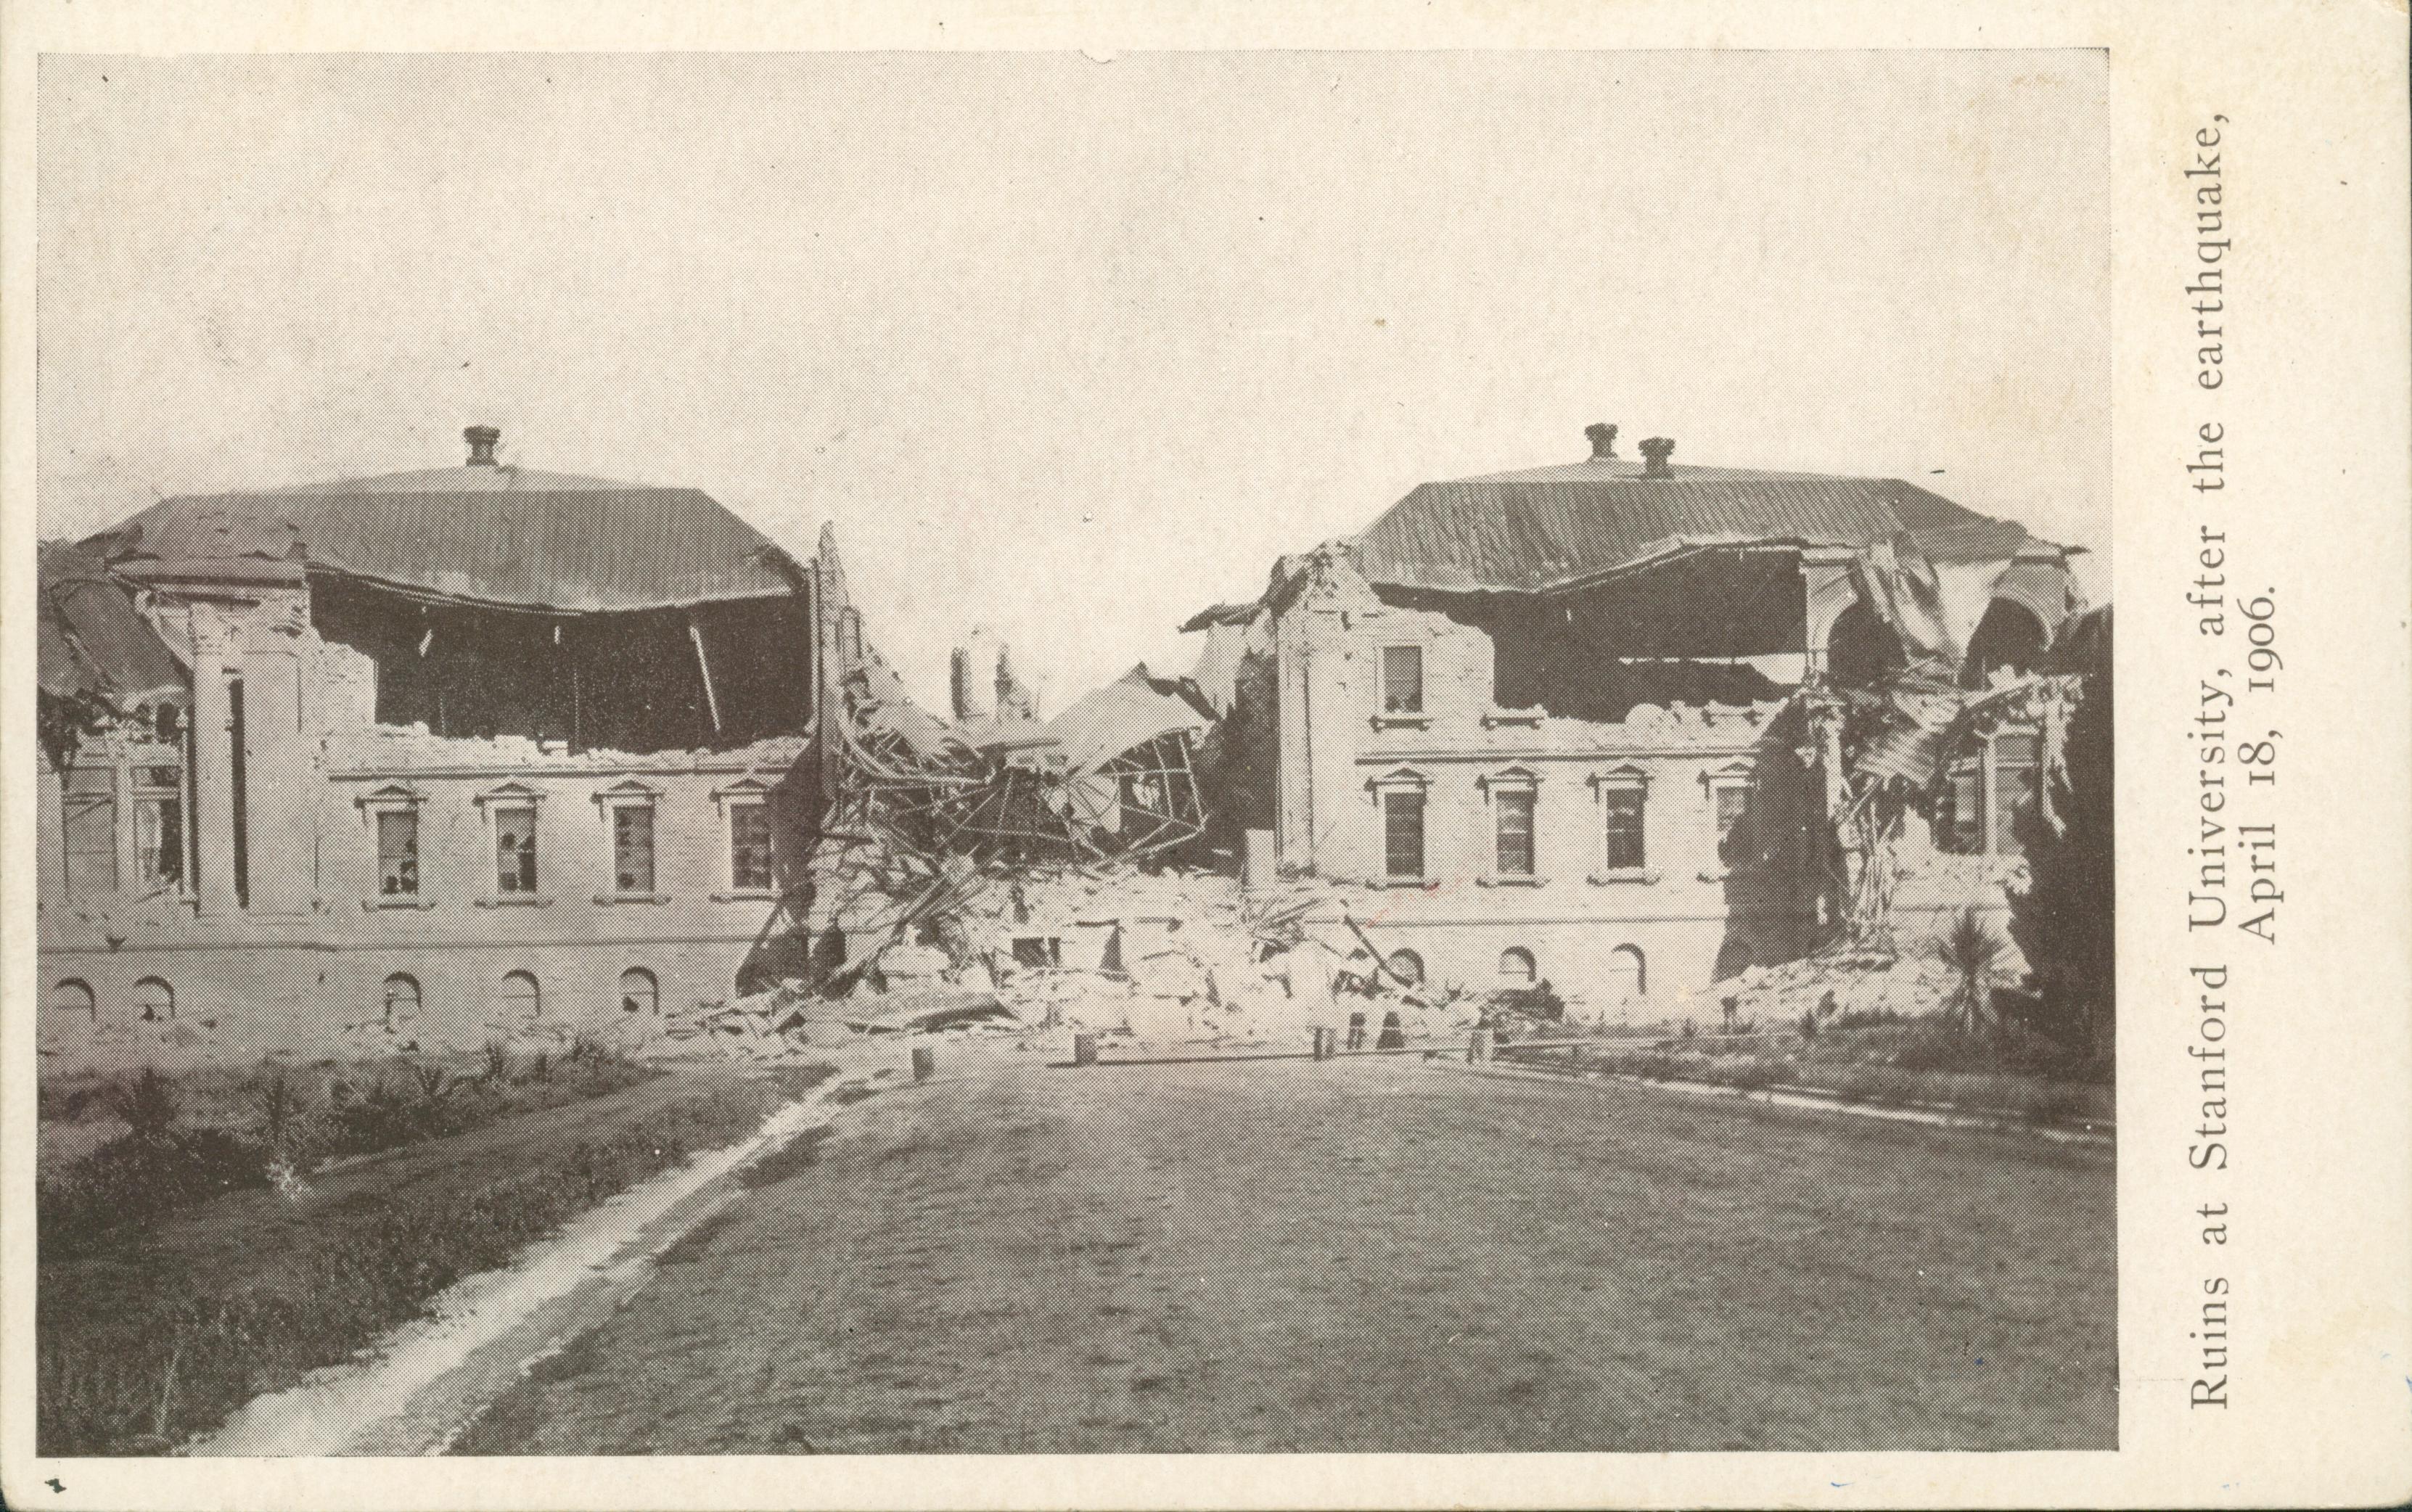 View of the destroyed university gymnasium after the 1906 earthquake